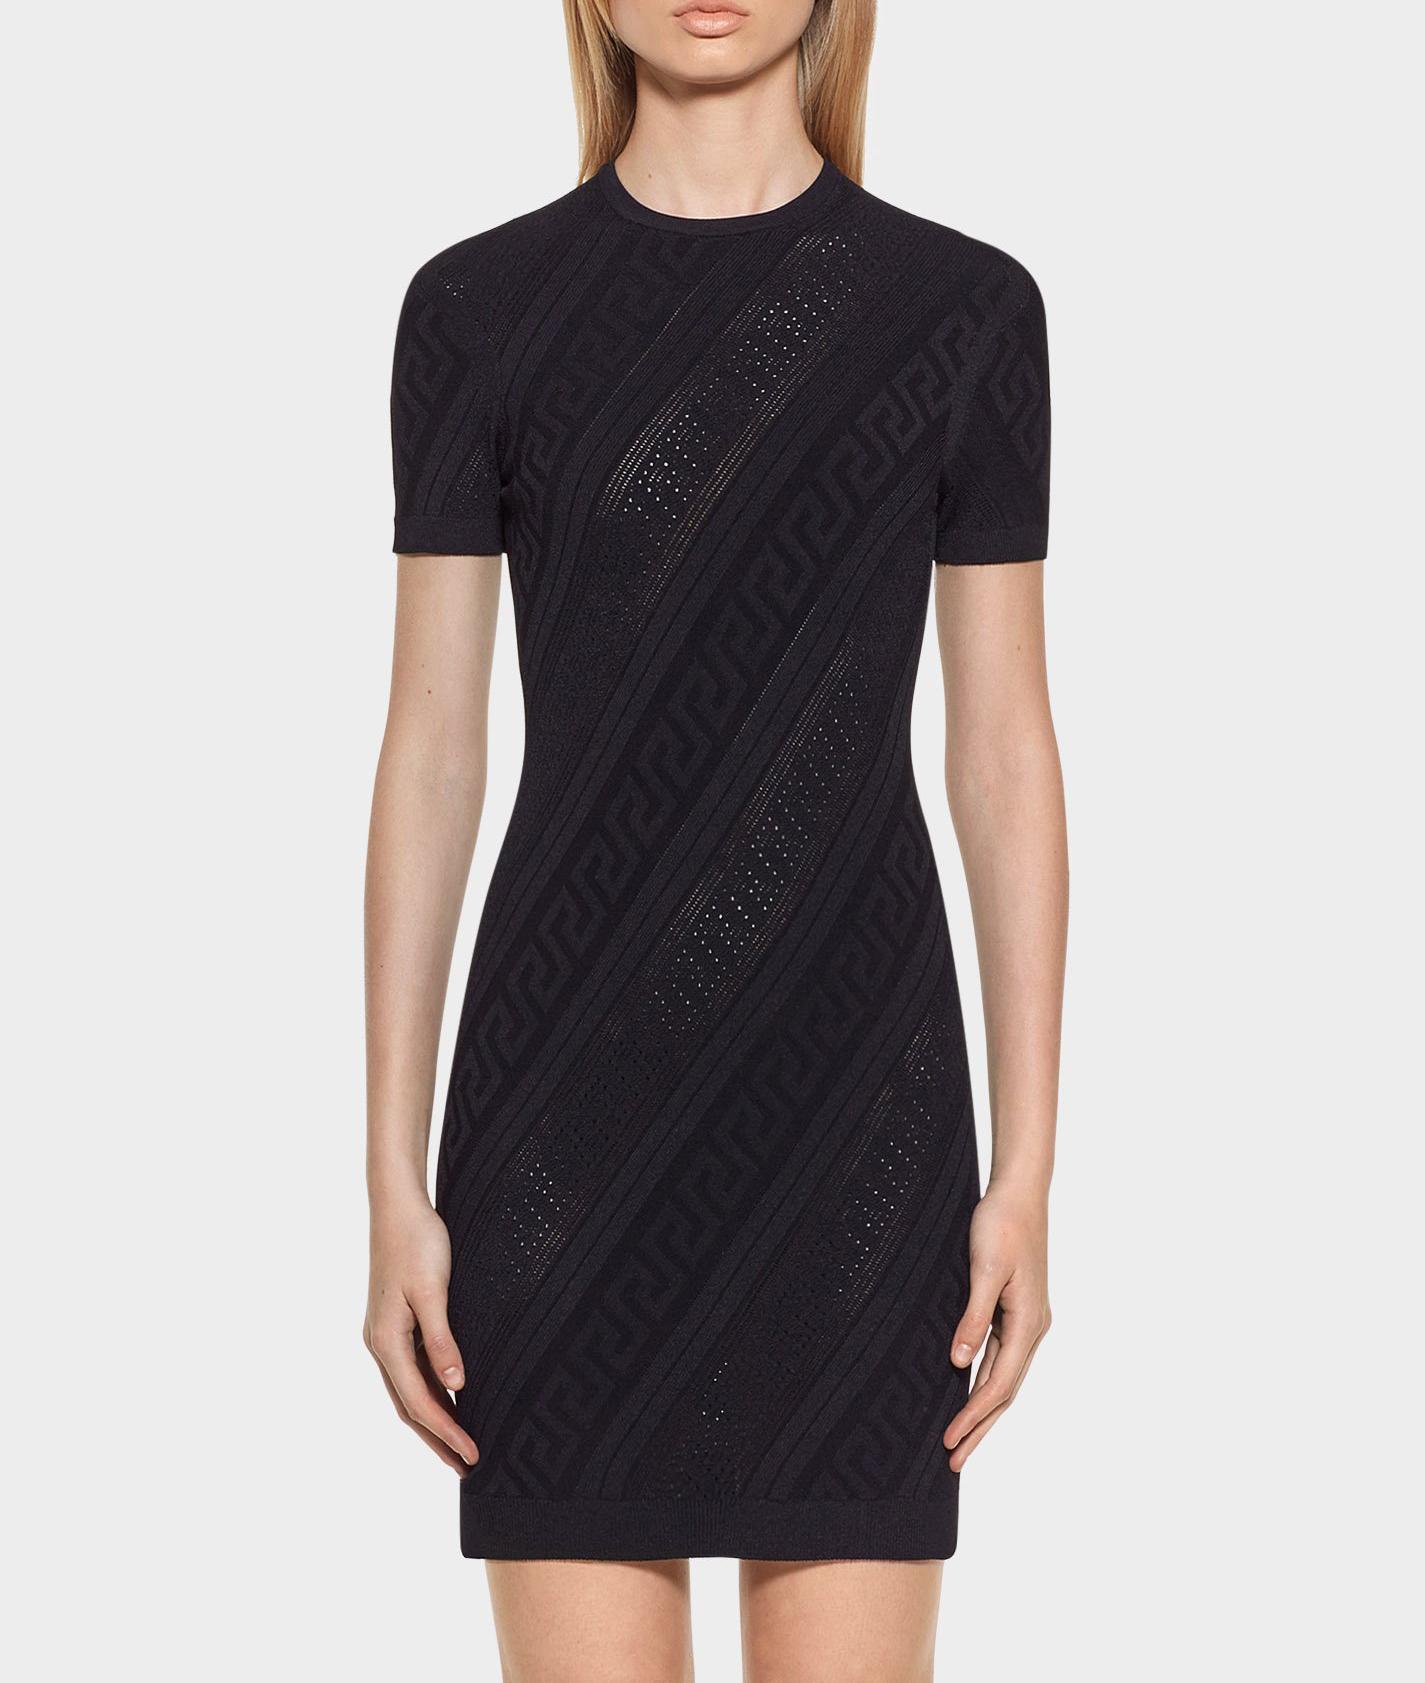 VERSACE 

This multi-stitched stretch short sleeve tight fitting knit dress is both versatile and stylish.

Multi-stitch
Greek Key detail
Round neck
Short sleeves
83% Viscose
17% Polyester

IT Size 44 - US 8
and
IT Size 42 - US 6

Made in